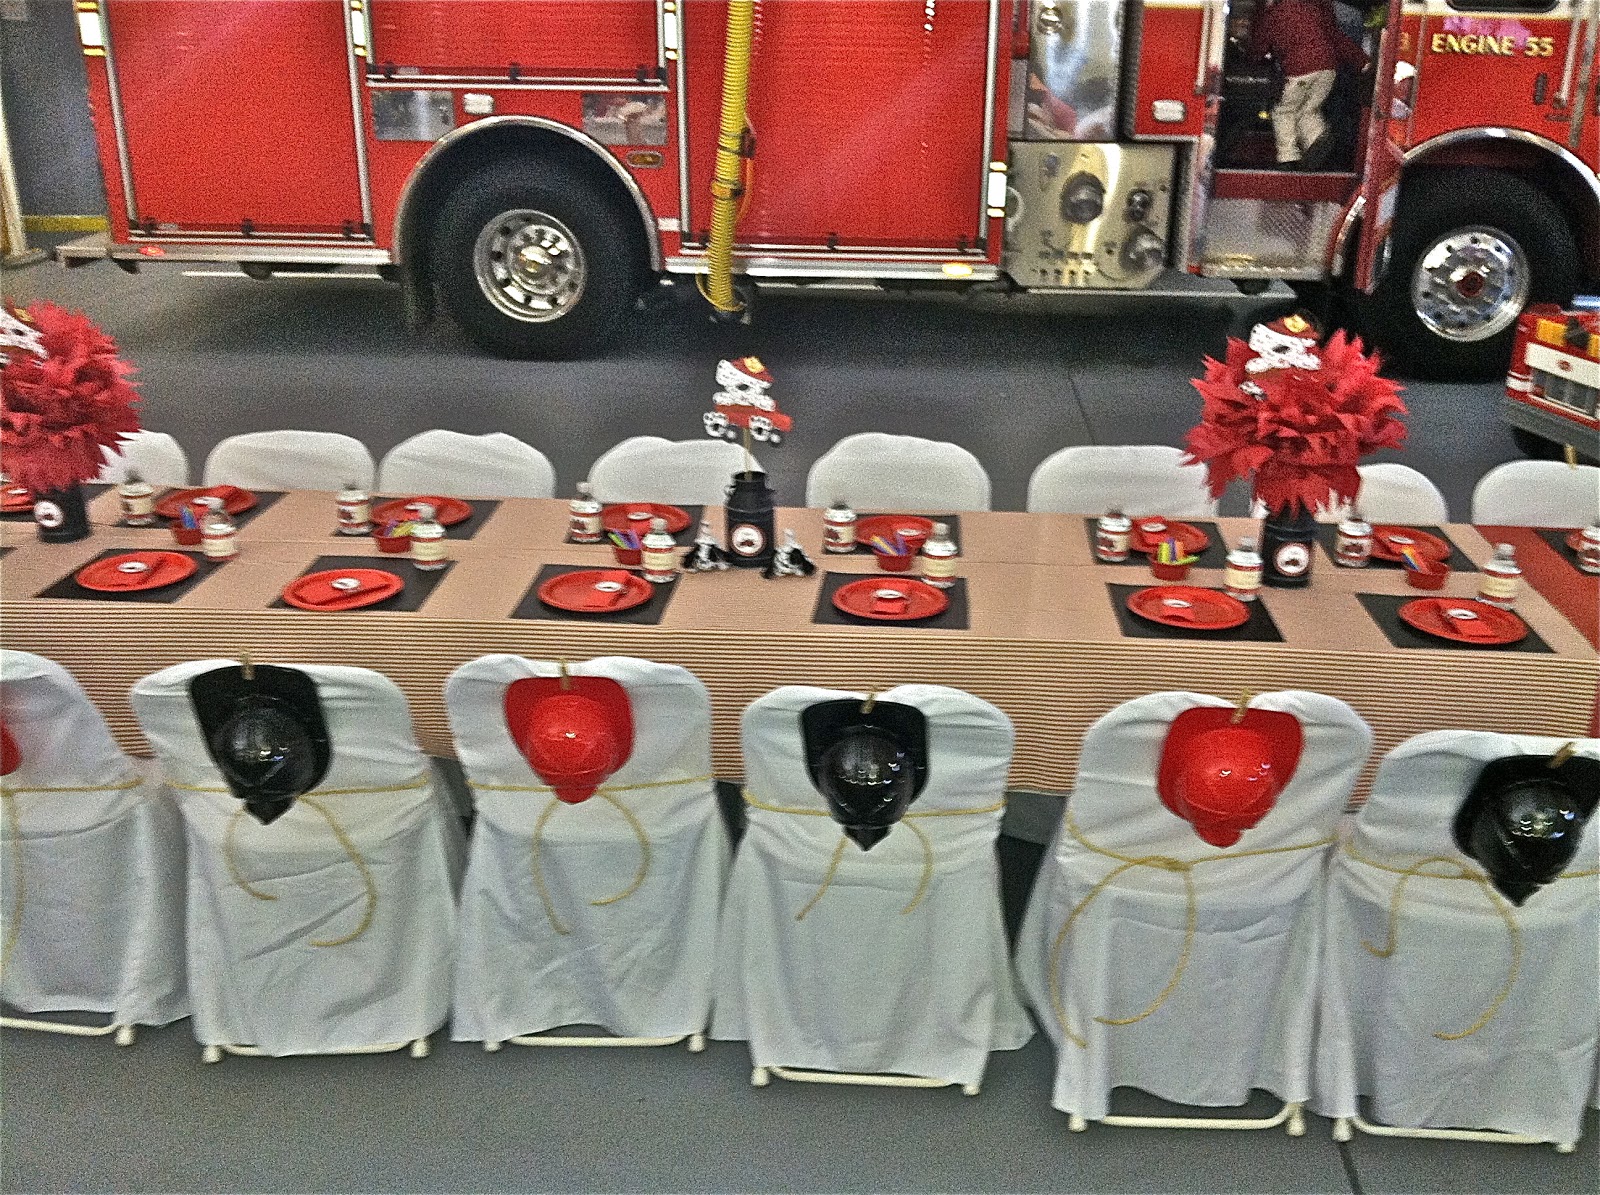 fire retirement firefighter department decorations centerpieces birthday fireman theme table dept blazin fighter parties hall themed backdrop jack planmeapartyinpa truck